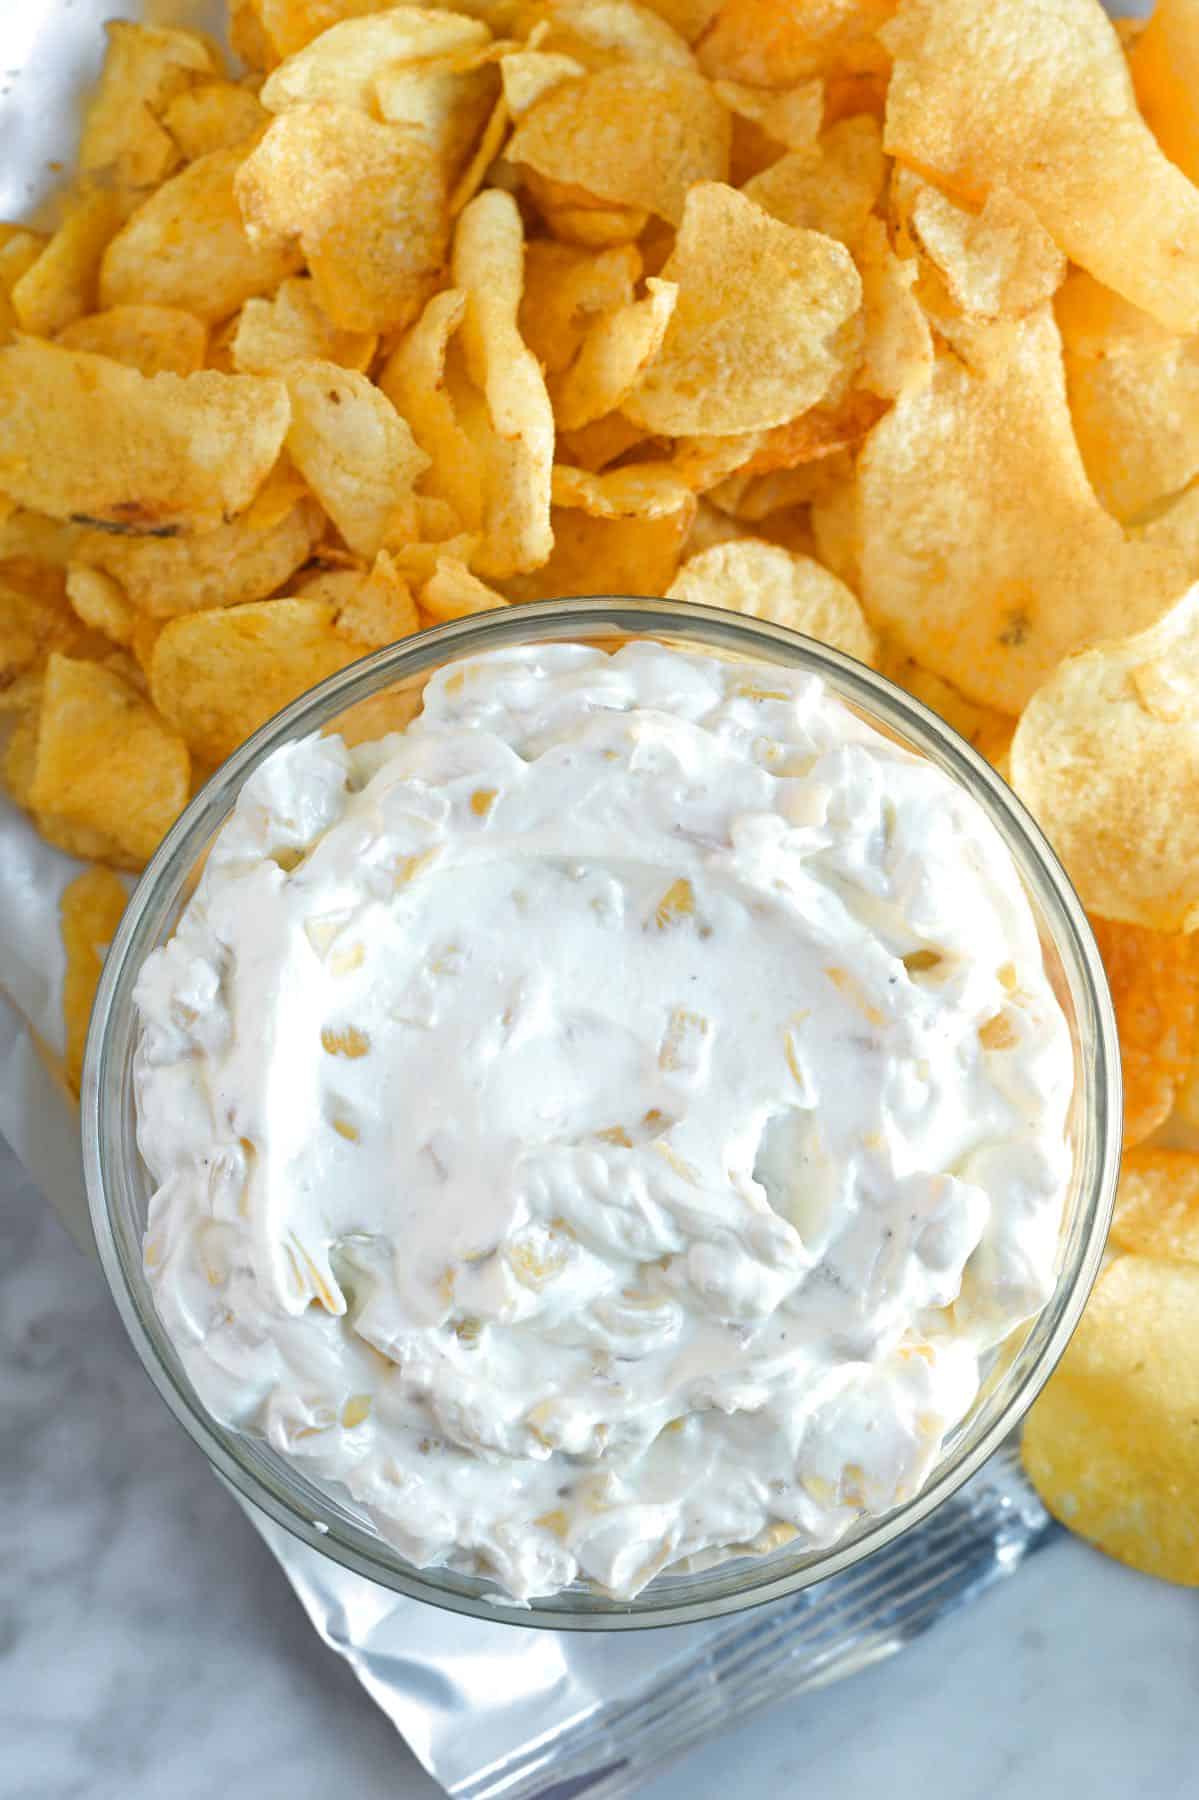 Homemade Onion Dip with chips